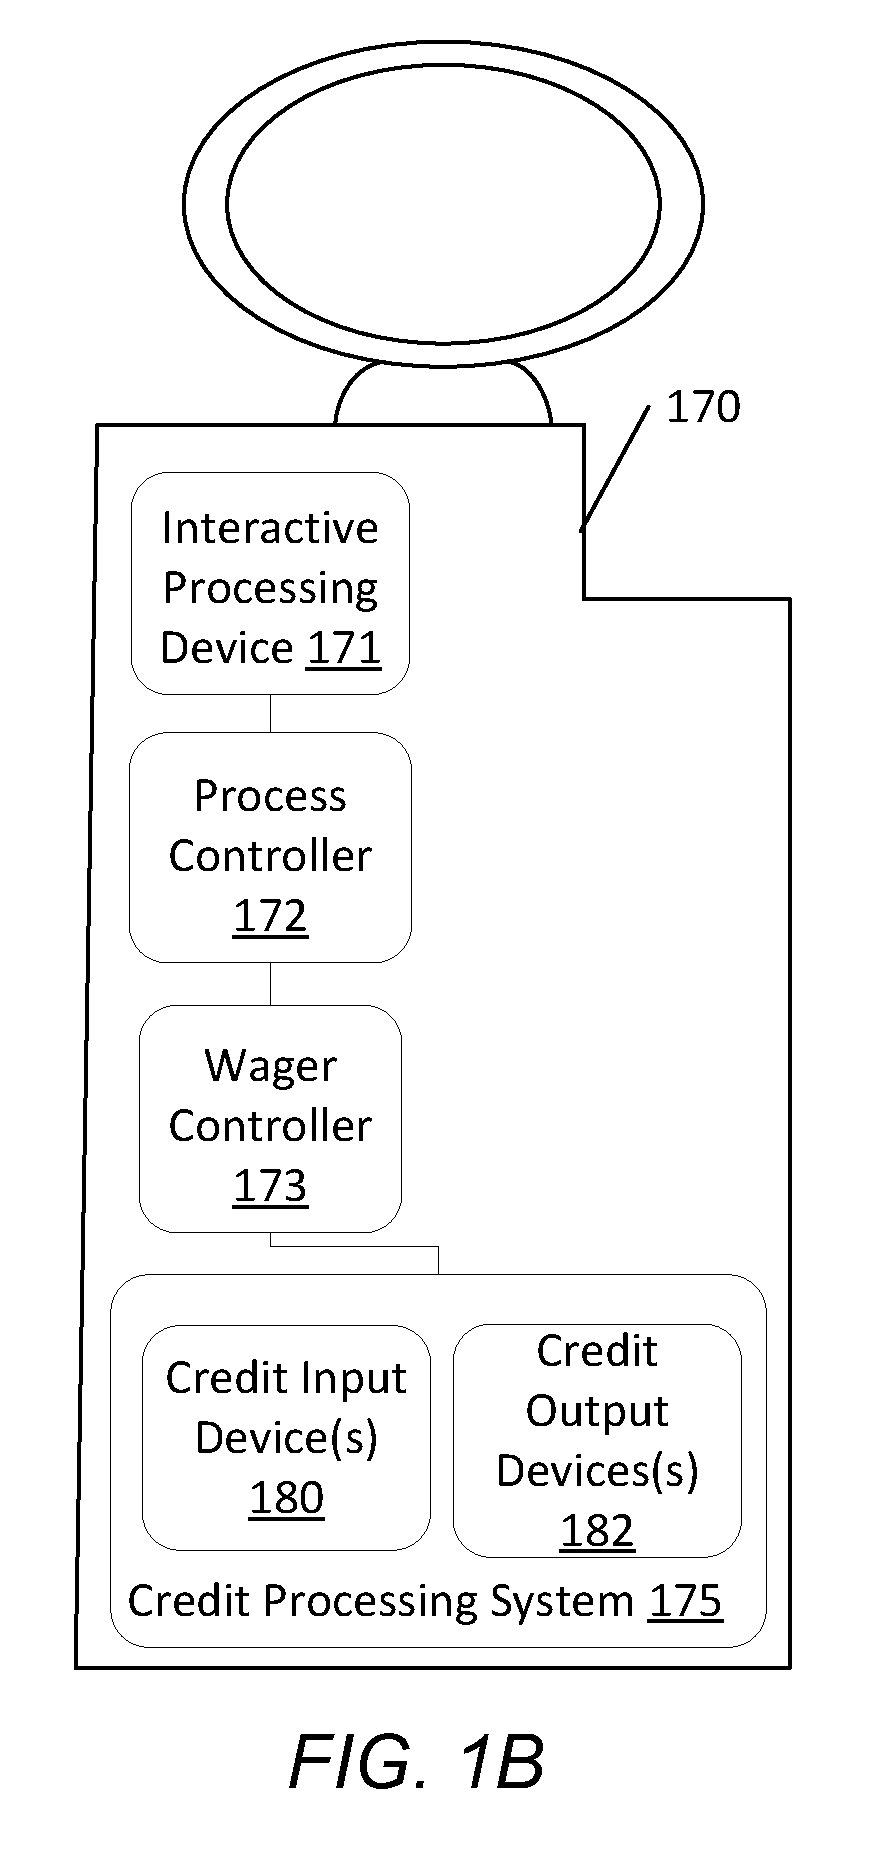 Gwc production monitoring interleaved wagering system